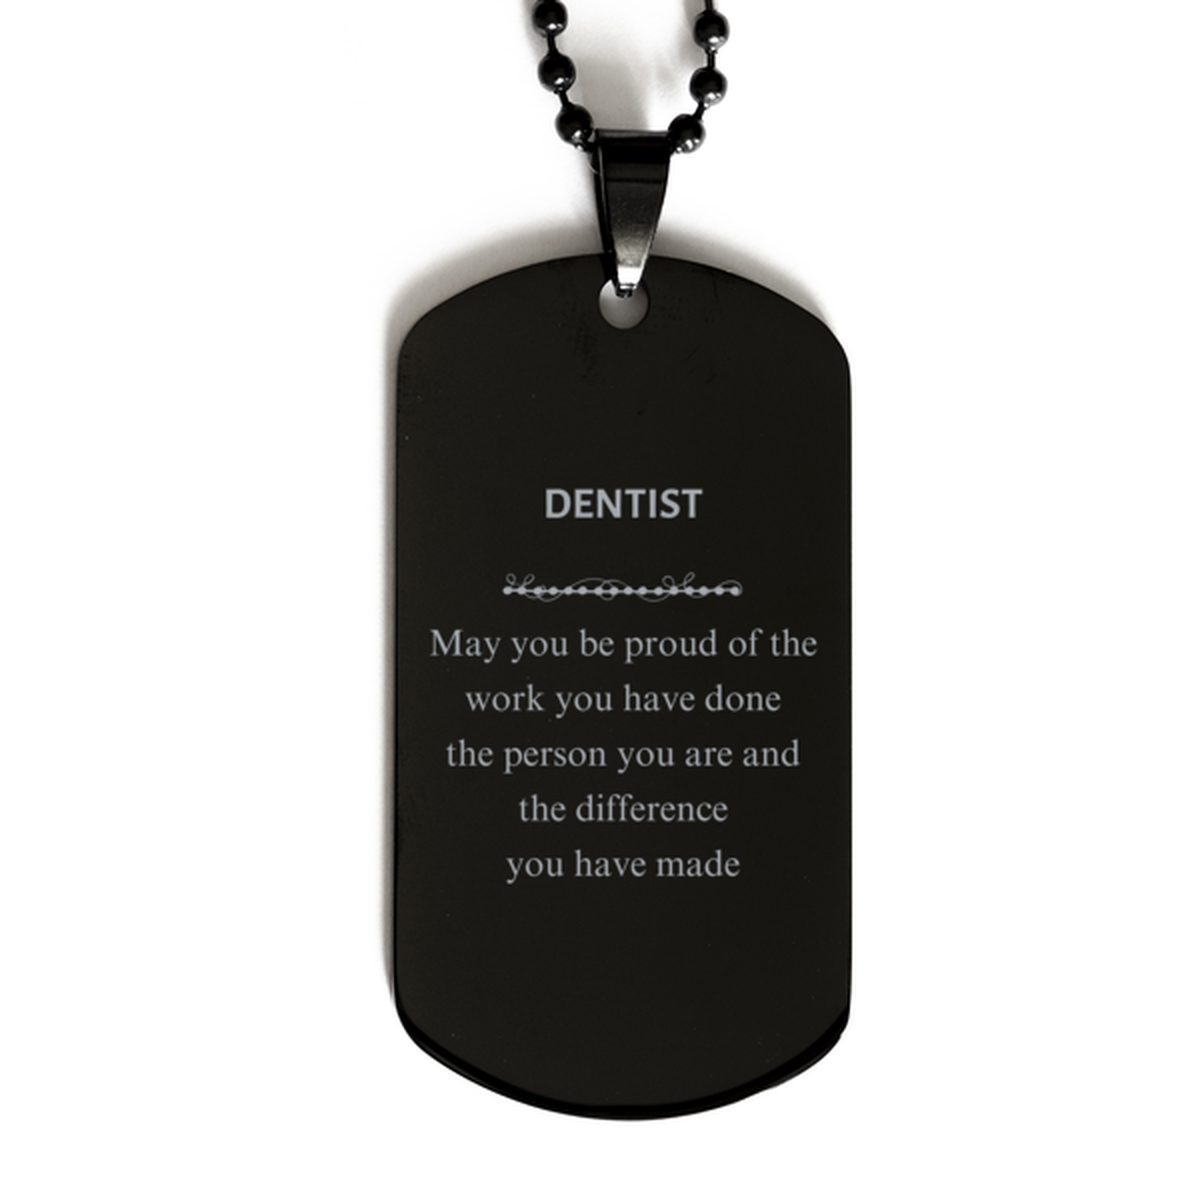 Dentist May you be proud of the work you have done, Retirement Dentist Black Dog Tag for Colleague Appreciation Gifts Amazing for Dentist